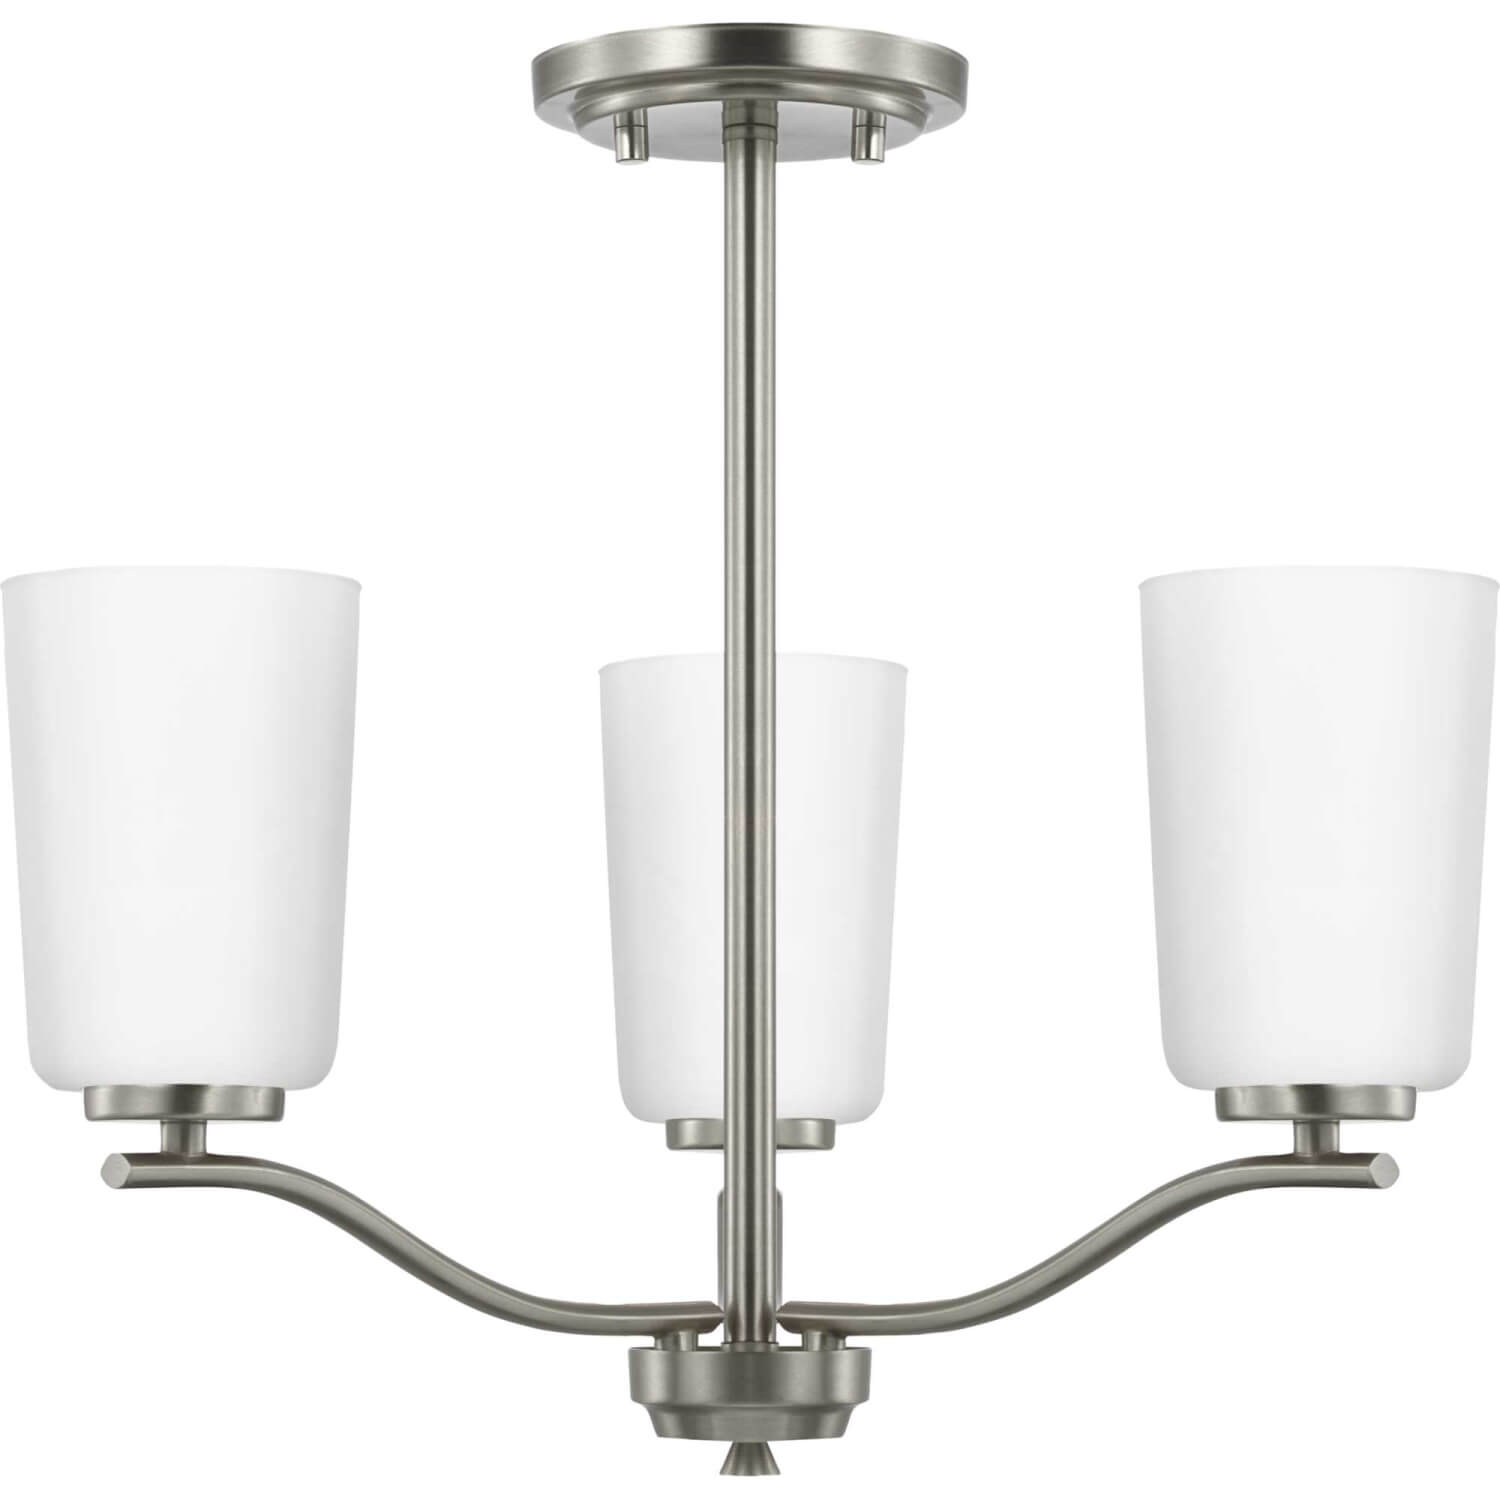 Progress Lighting Adley 3 Light 18 inch Convertible Chandelier in Brushed Nickel with Etched White Glass P400349-009